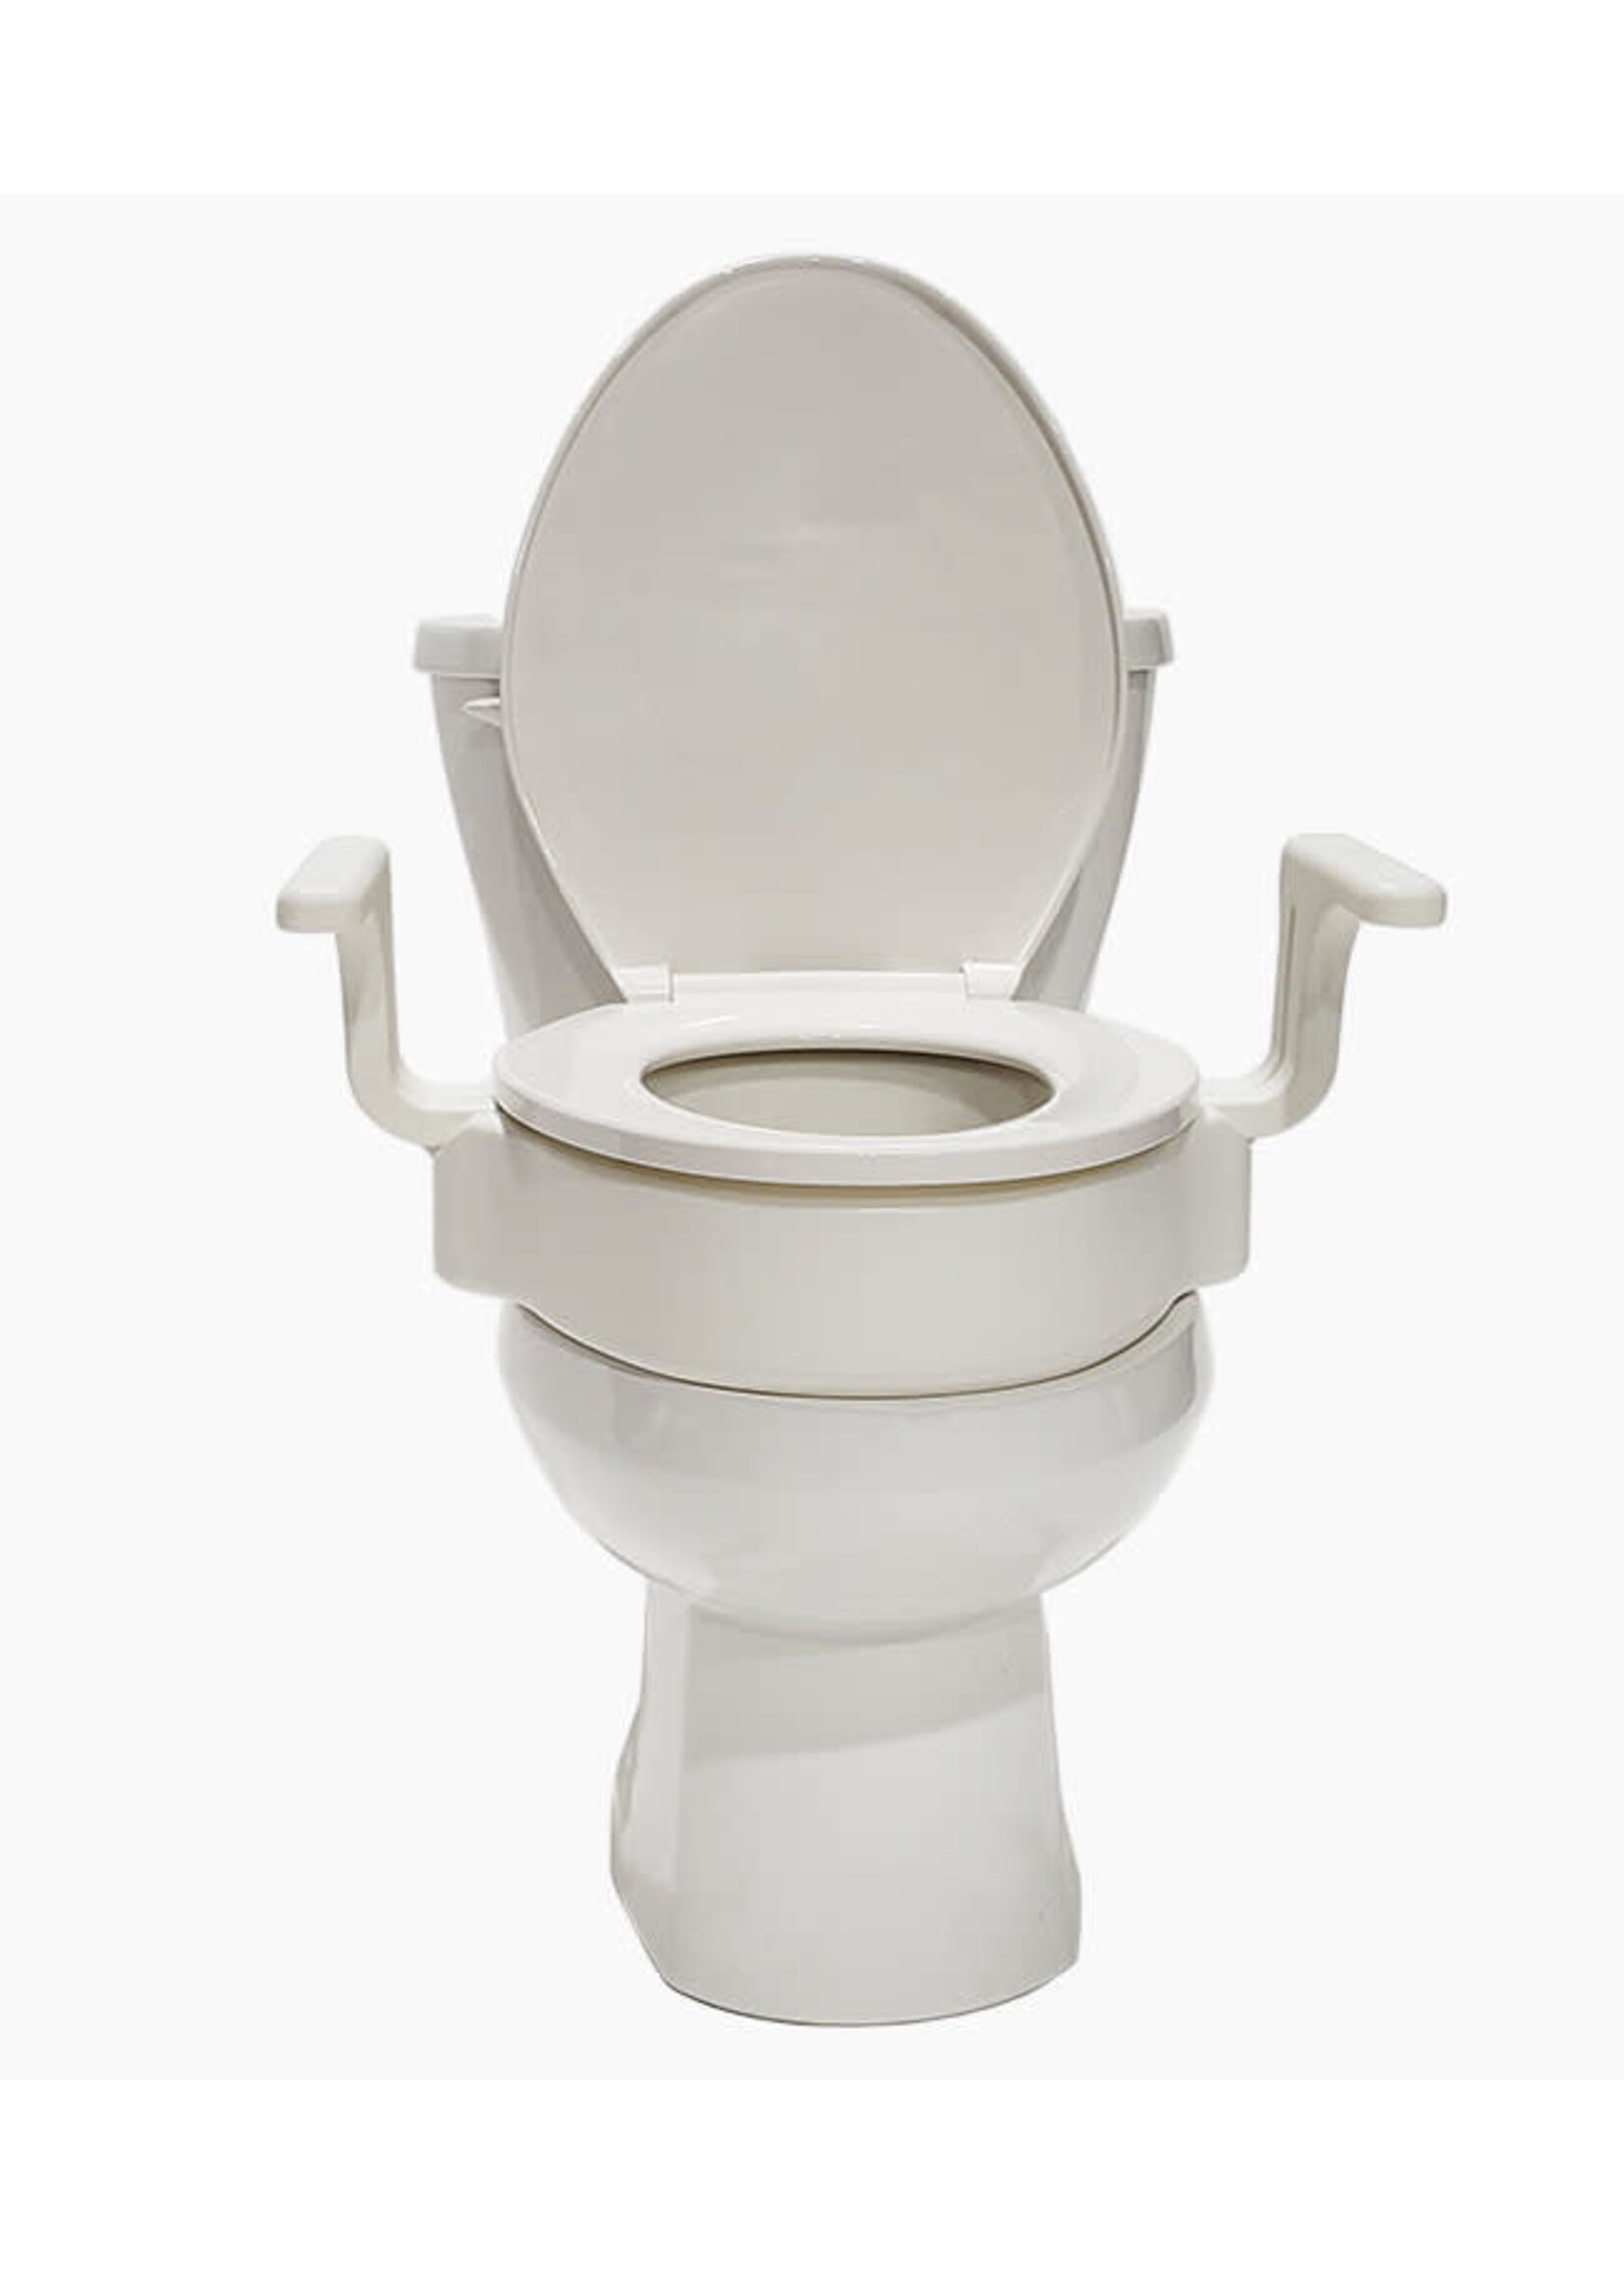 MOBB 4" Elongated Raised Toilet Seat With New Handles